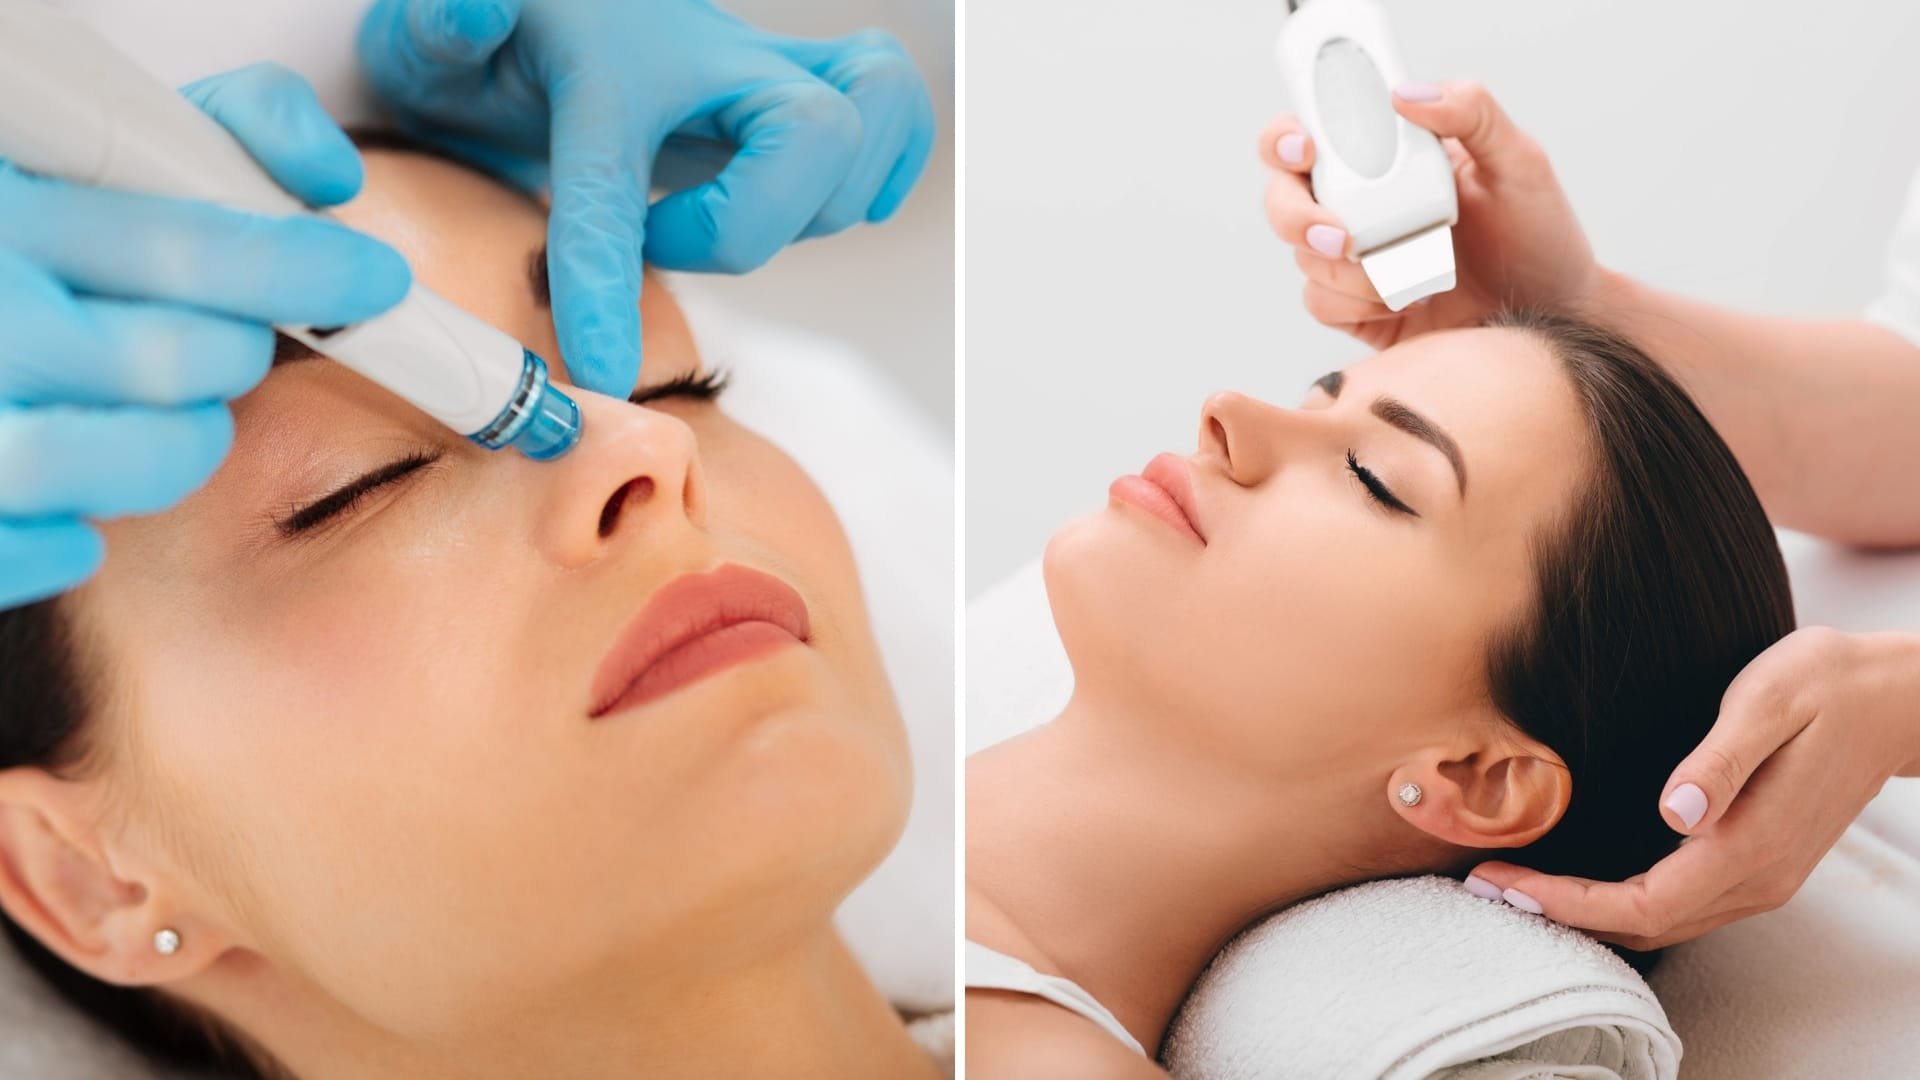 A Guide to the Best Medical Centers for HydraFacial Treatment in Dubai